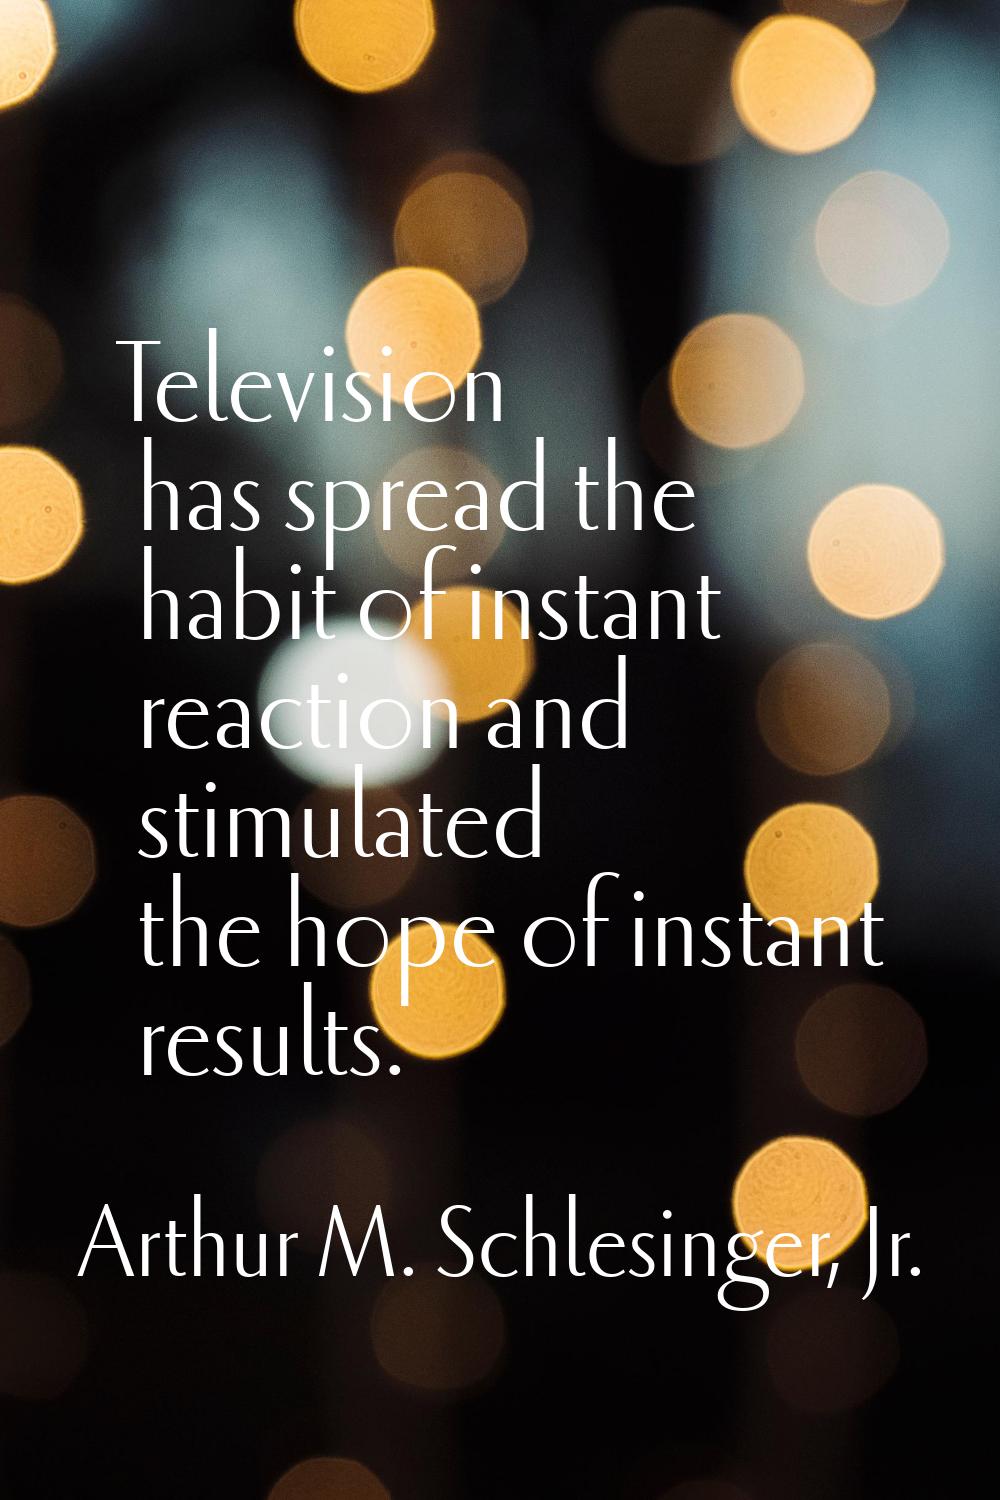 Television has spread the habit of instant reaction and stimulated the hope of instant results.